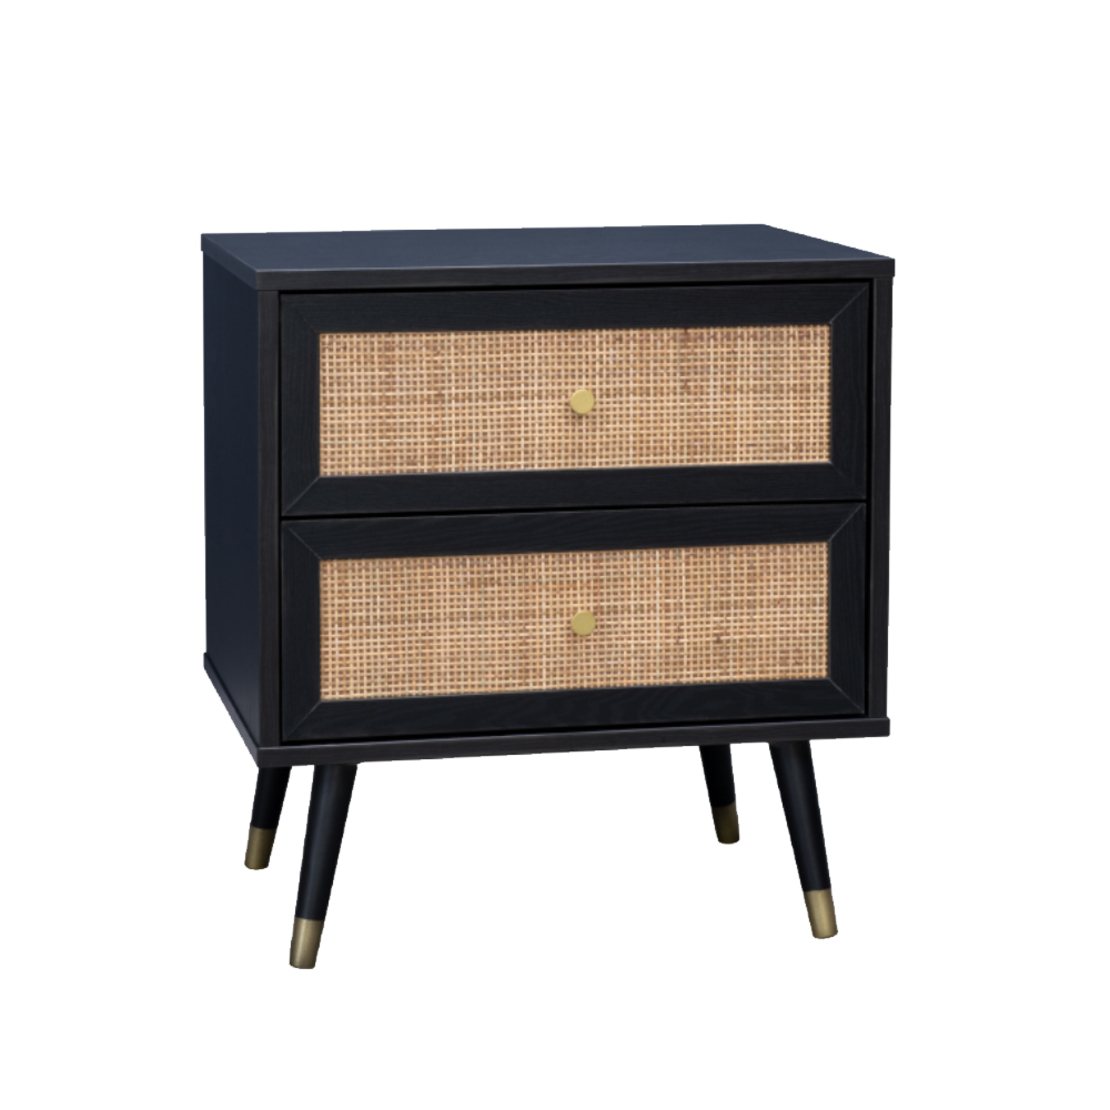 VIENNA NIGHTSTAND CHIPBOARD WITH MELAMINE BLACK WITH RATTAN GOLD E1 PRC